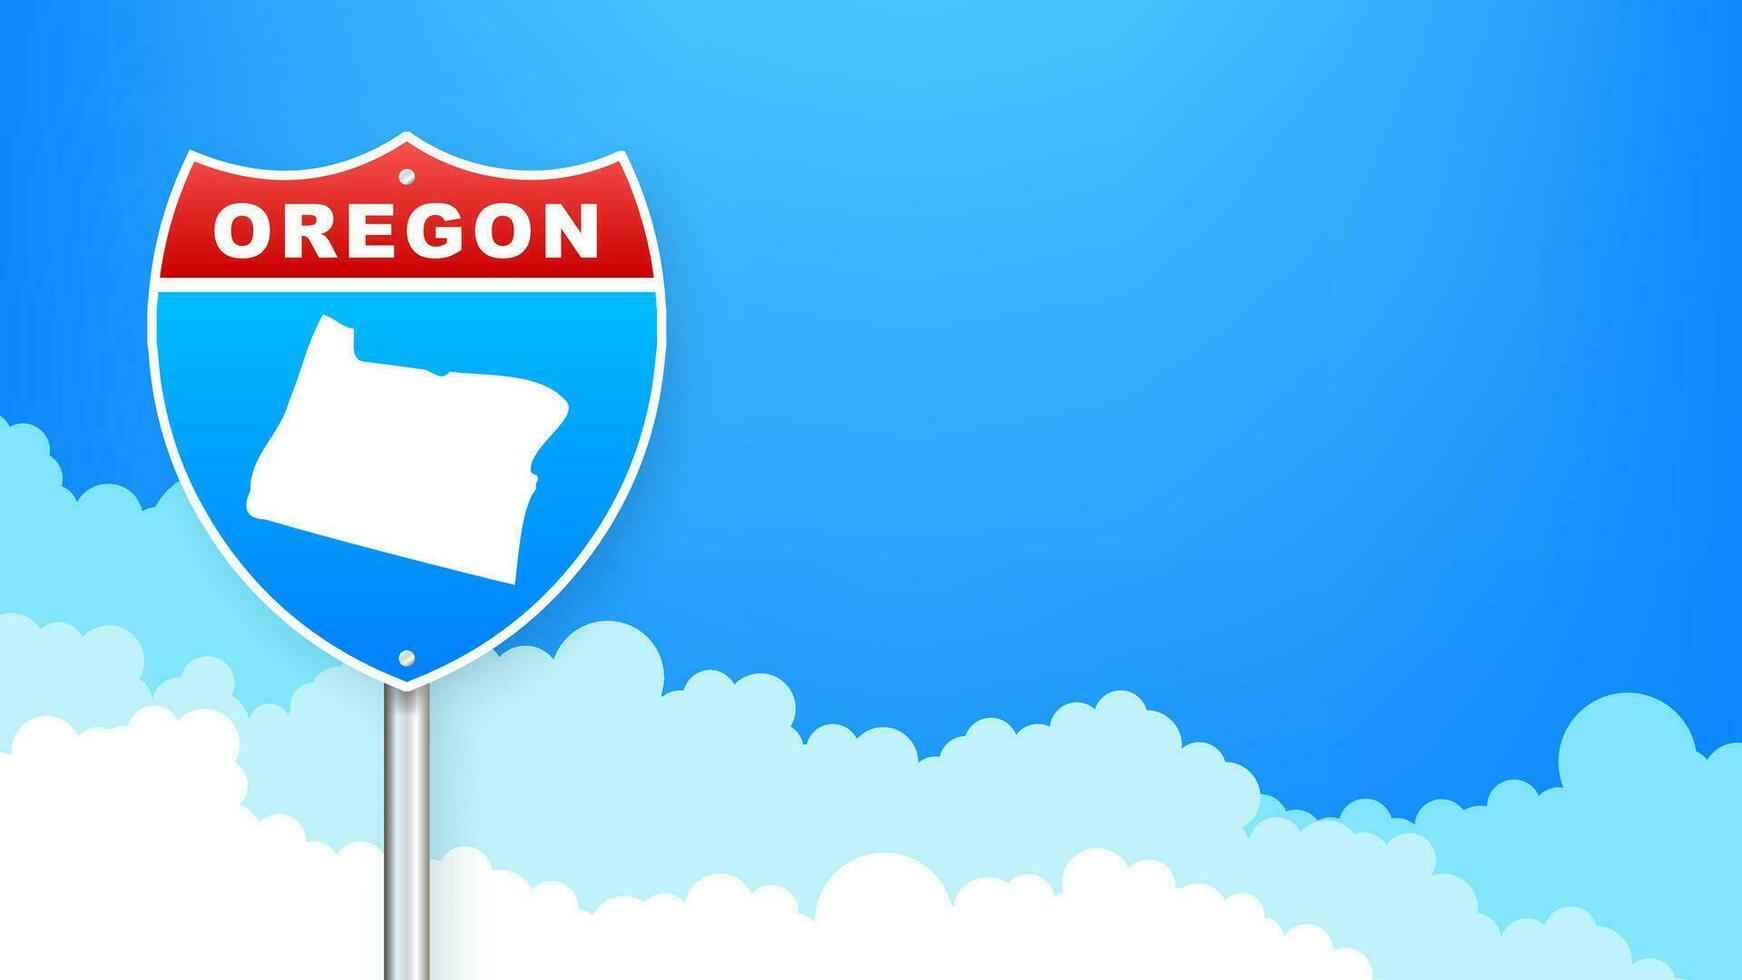 Oregon map on road sign. Welcome to State of Oregon. Vector illustration